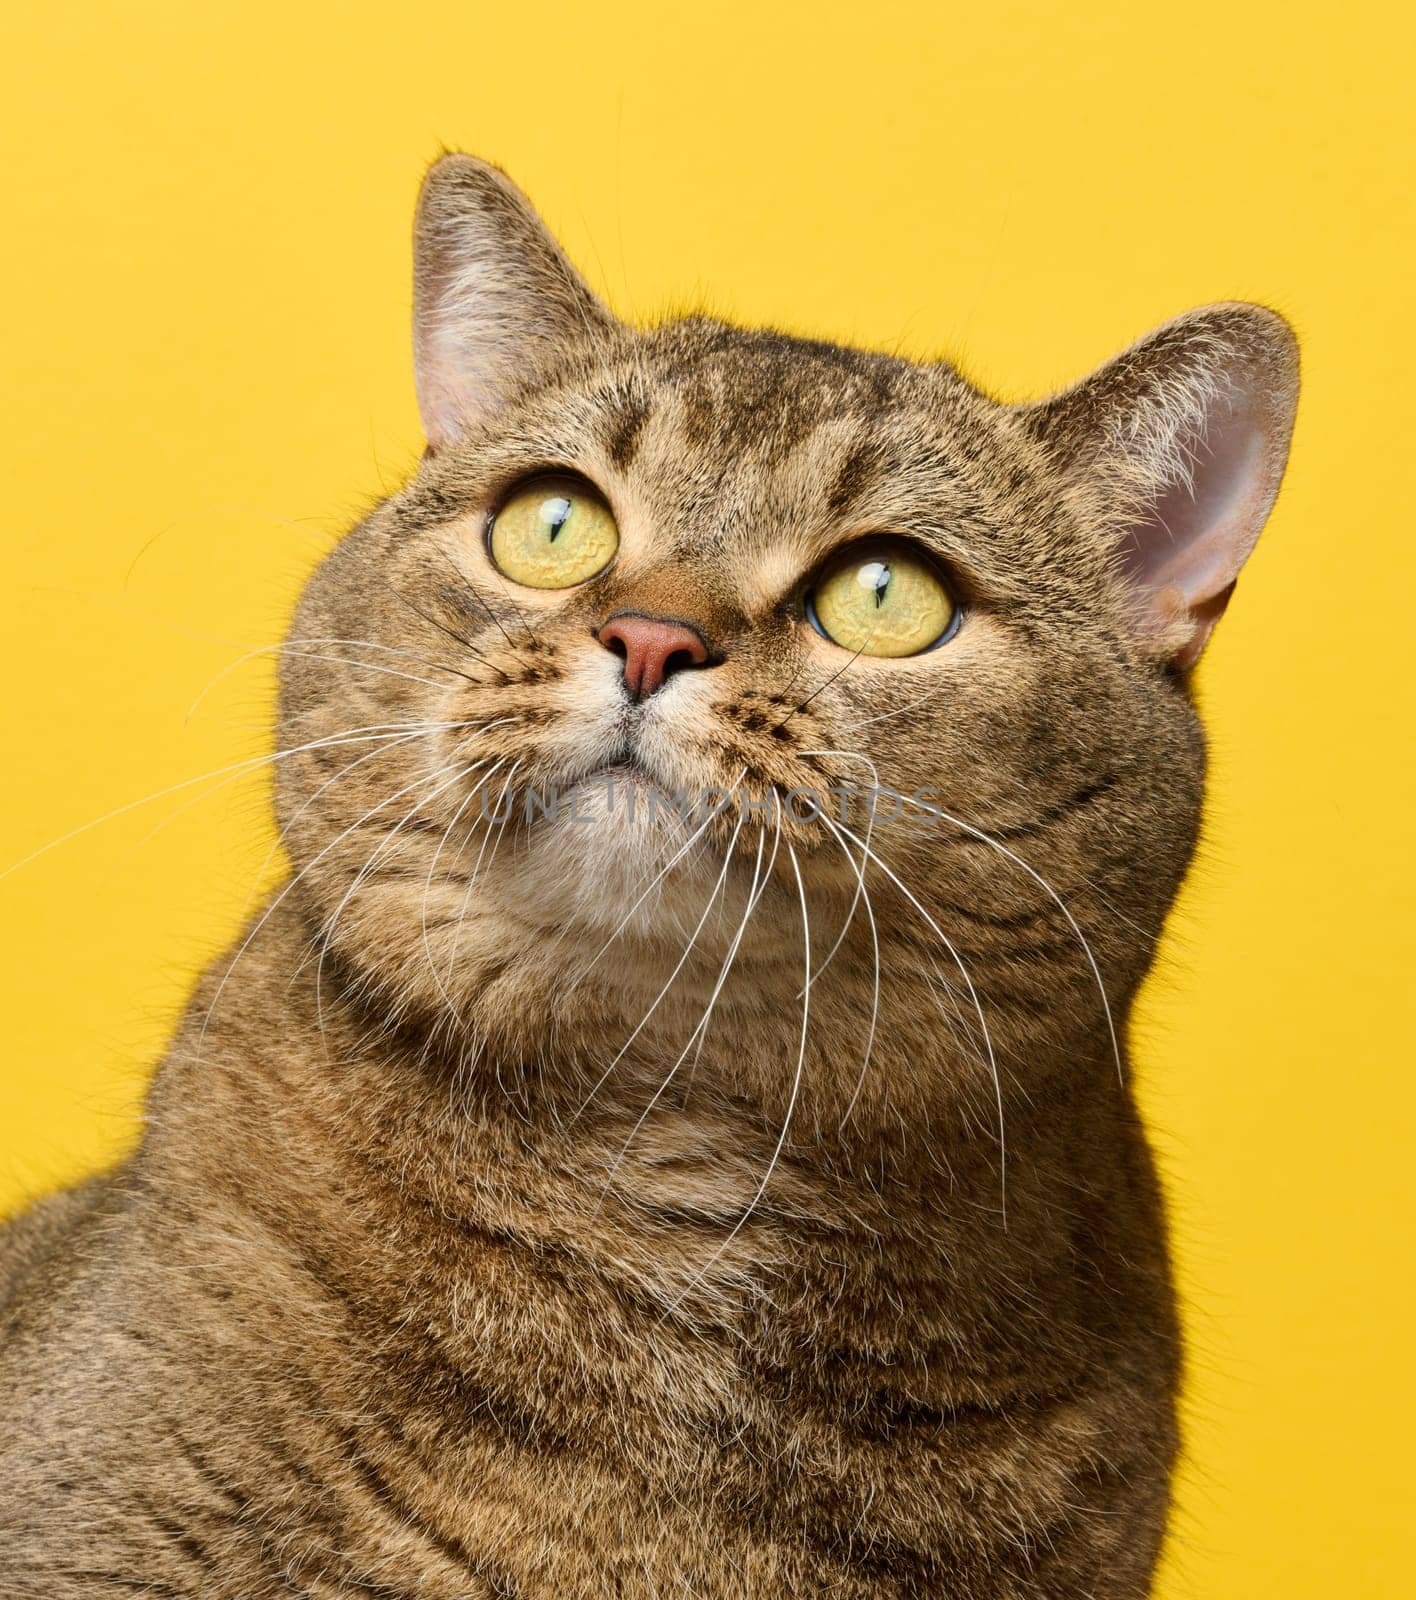 A cute adult straight-eared Scottish breed gray cat sits on a yellow background